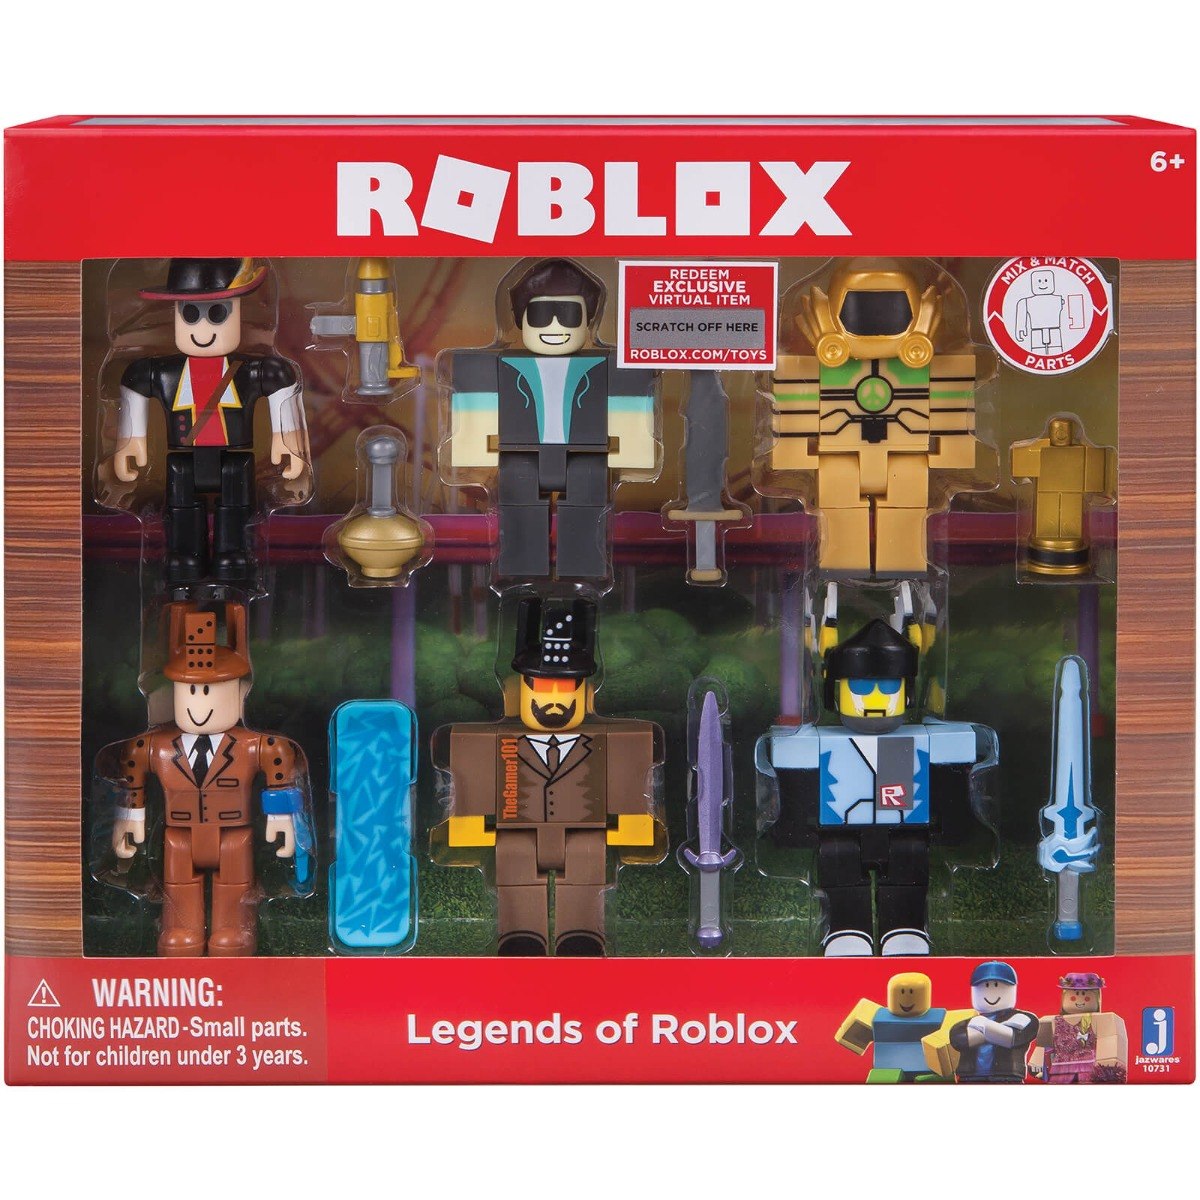 Roblox Figura Legends Of Roblox Pack Xuruguay - assemble the legends of roblox this set includes six of the